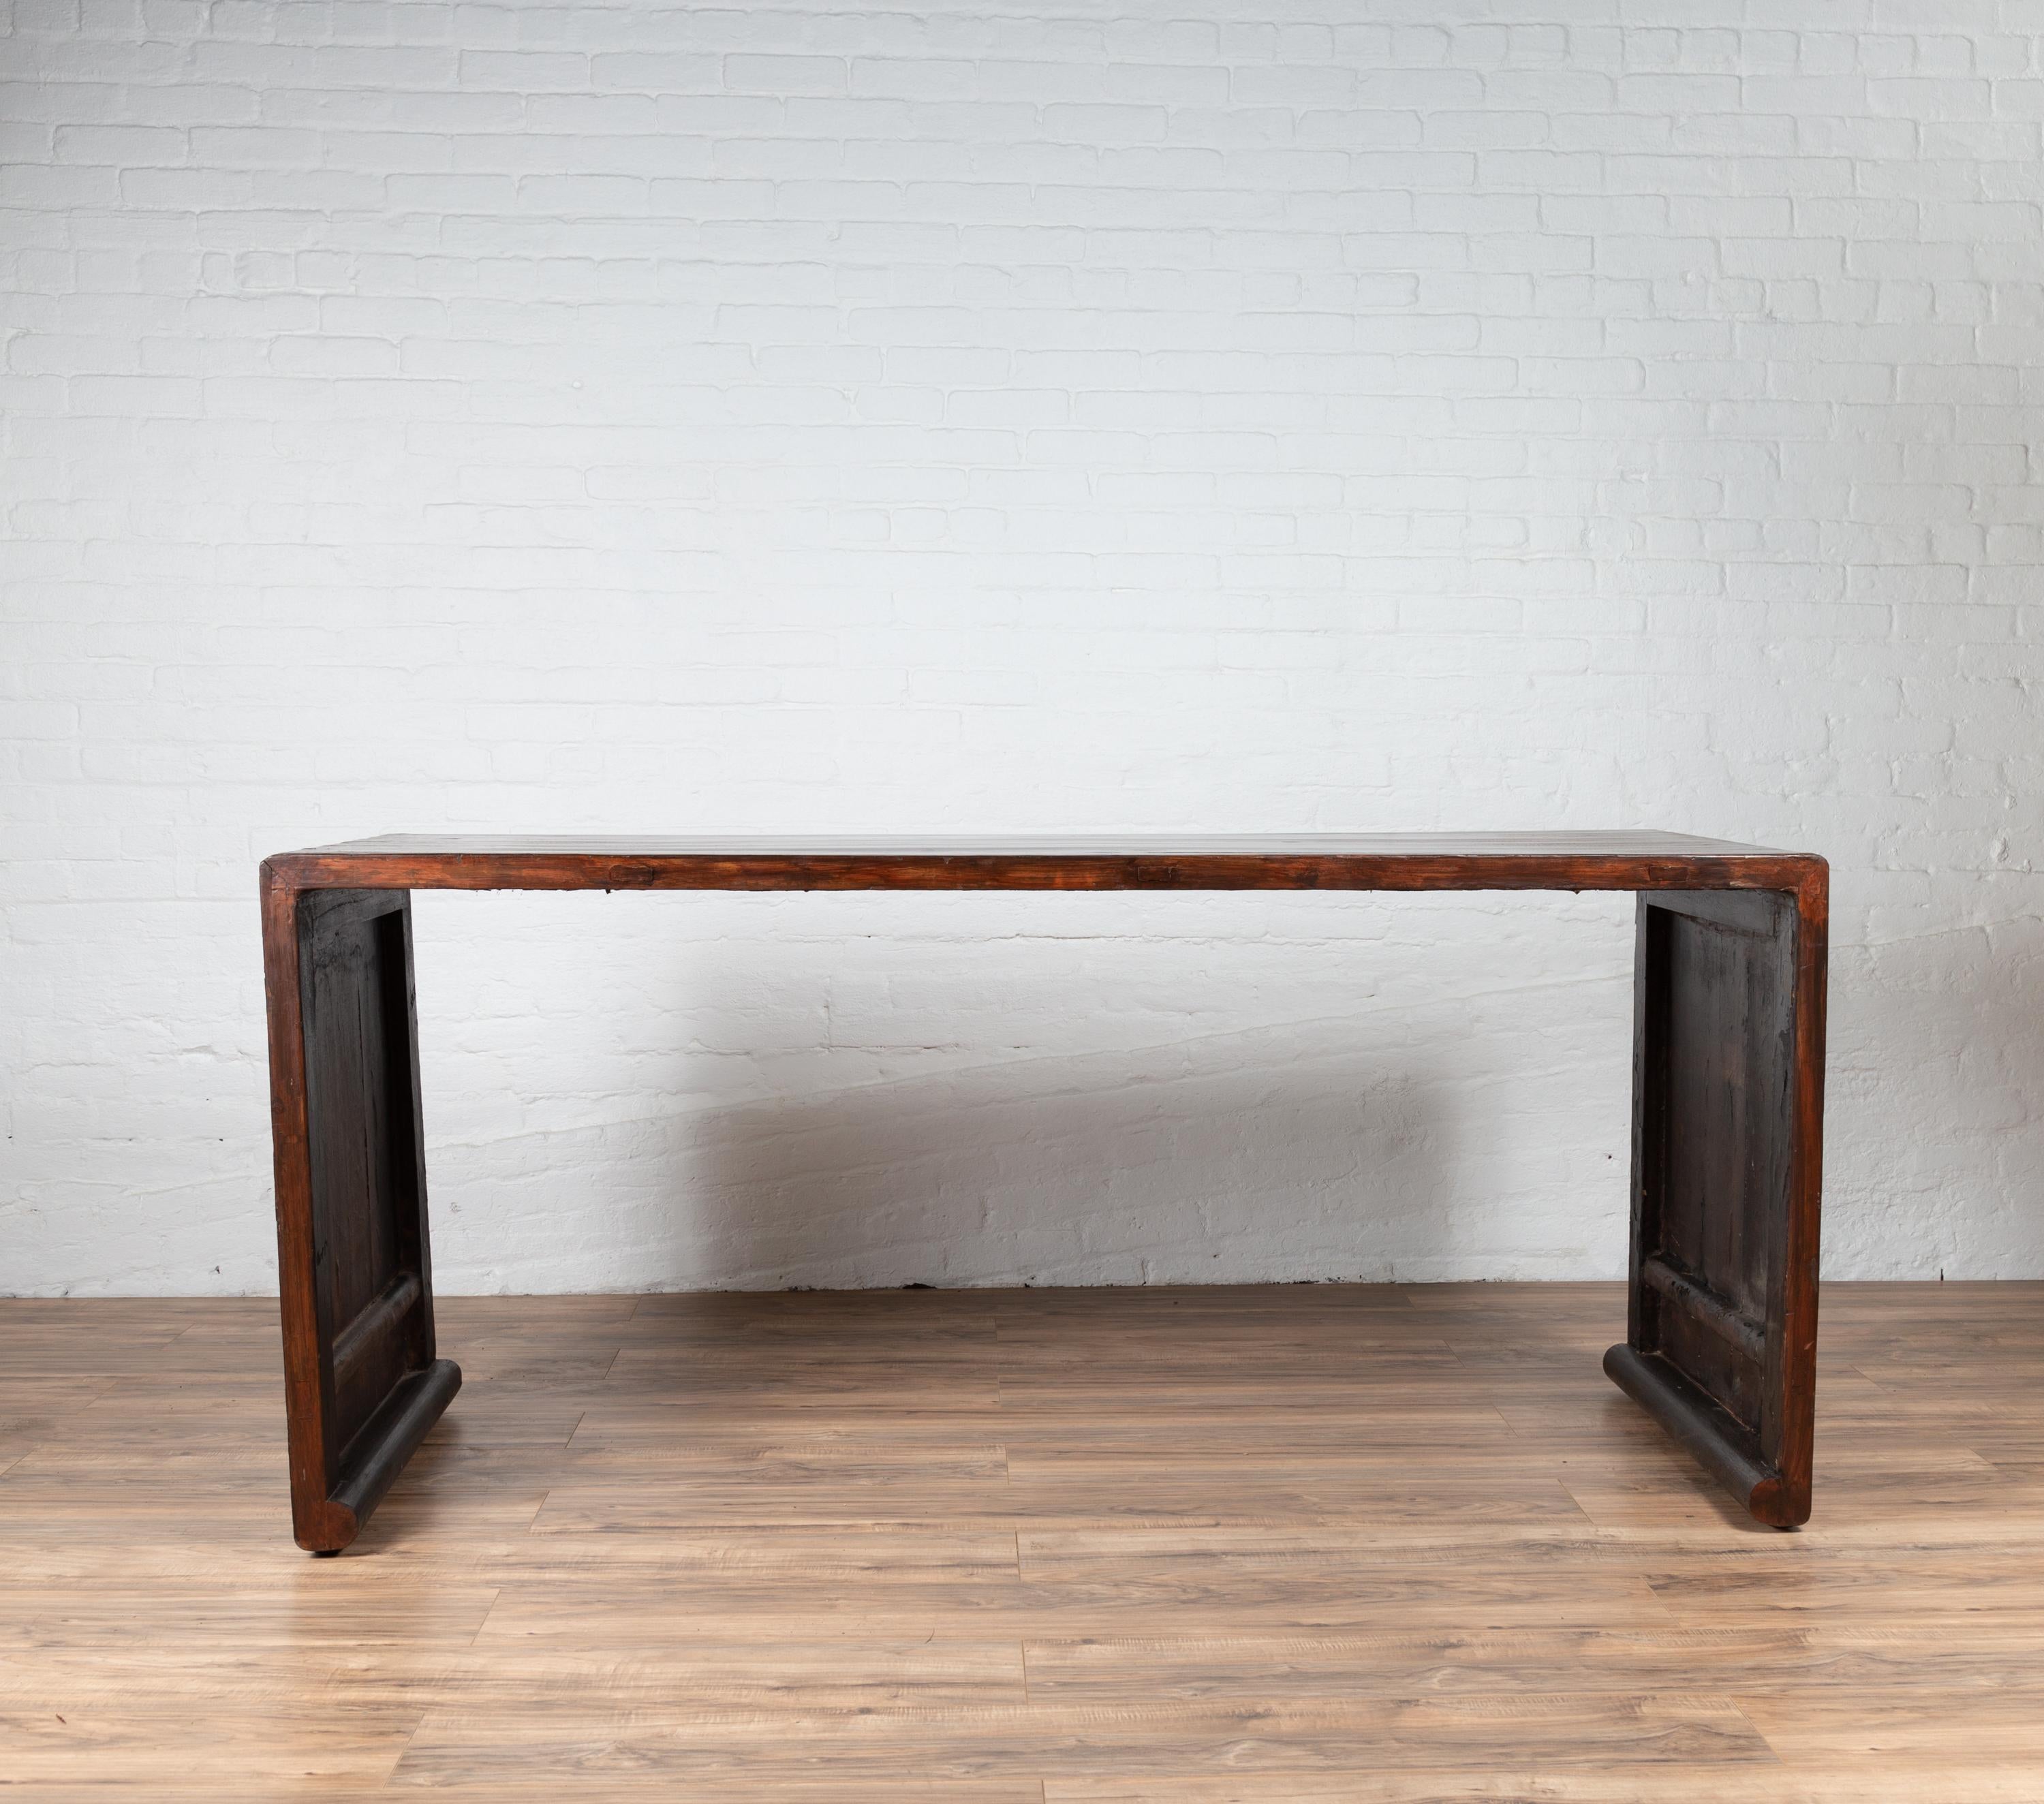 Burmese Vintage Waterfall Console Table with Scrolling Feet and Dark Patina In Good Condition For Sale In Yonkers, NY